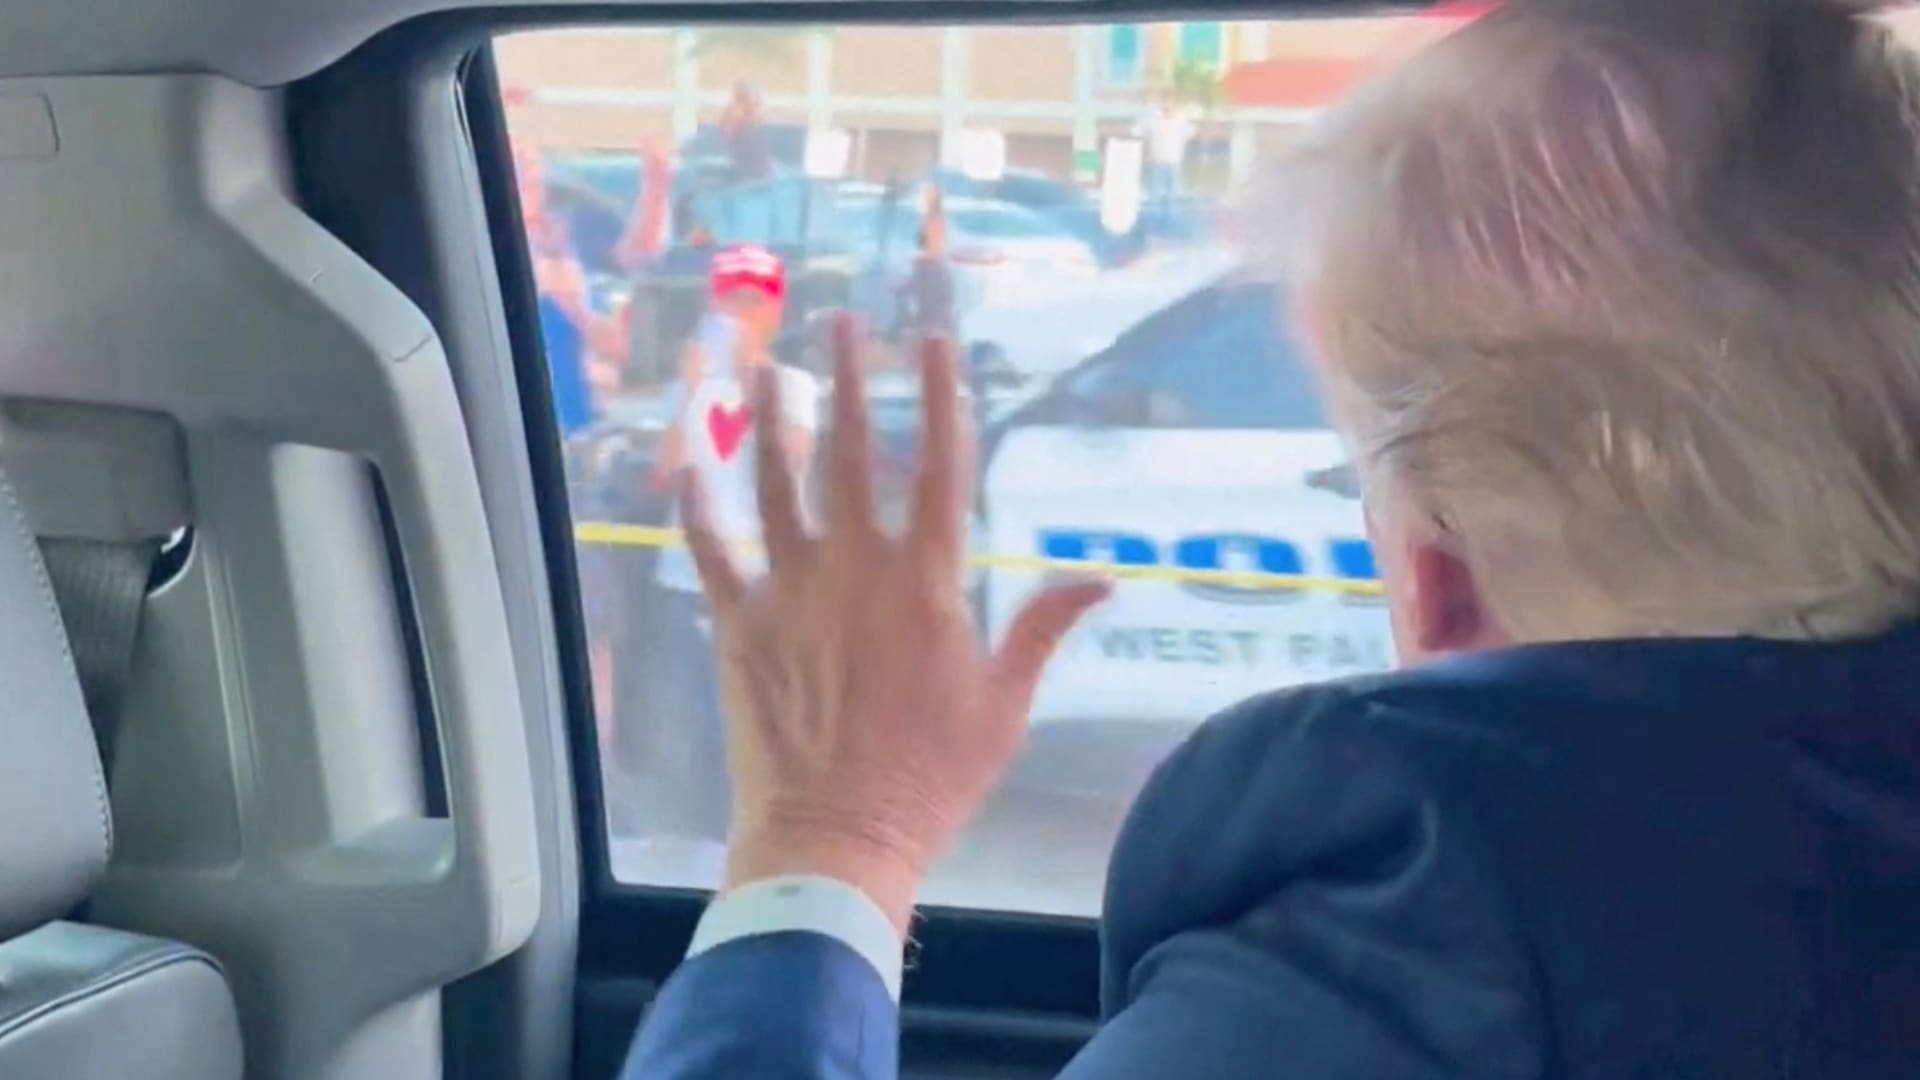 Former U.S. President Donald Trump waves to a crowd en route to his Mar-a-Lago resort after being indicted by a Manhattan grand jury following a probe into hush money paid to porn star Stormy Daniels, in Palm Beach, Florida, on April 4, 2023.